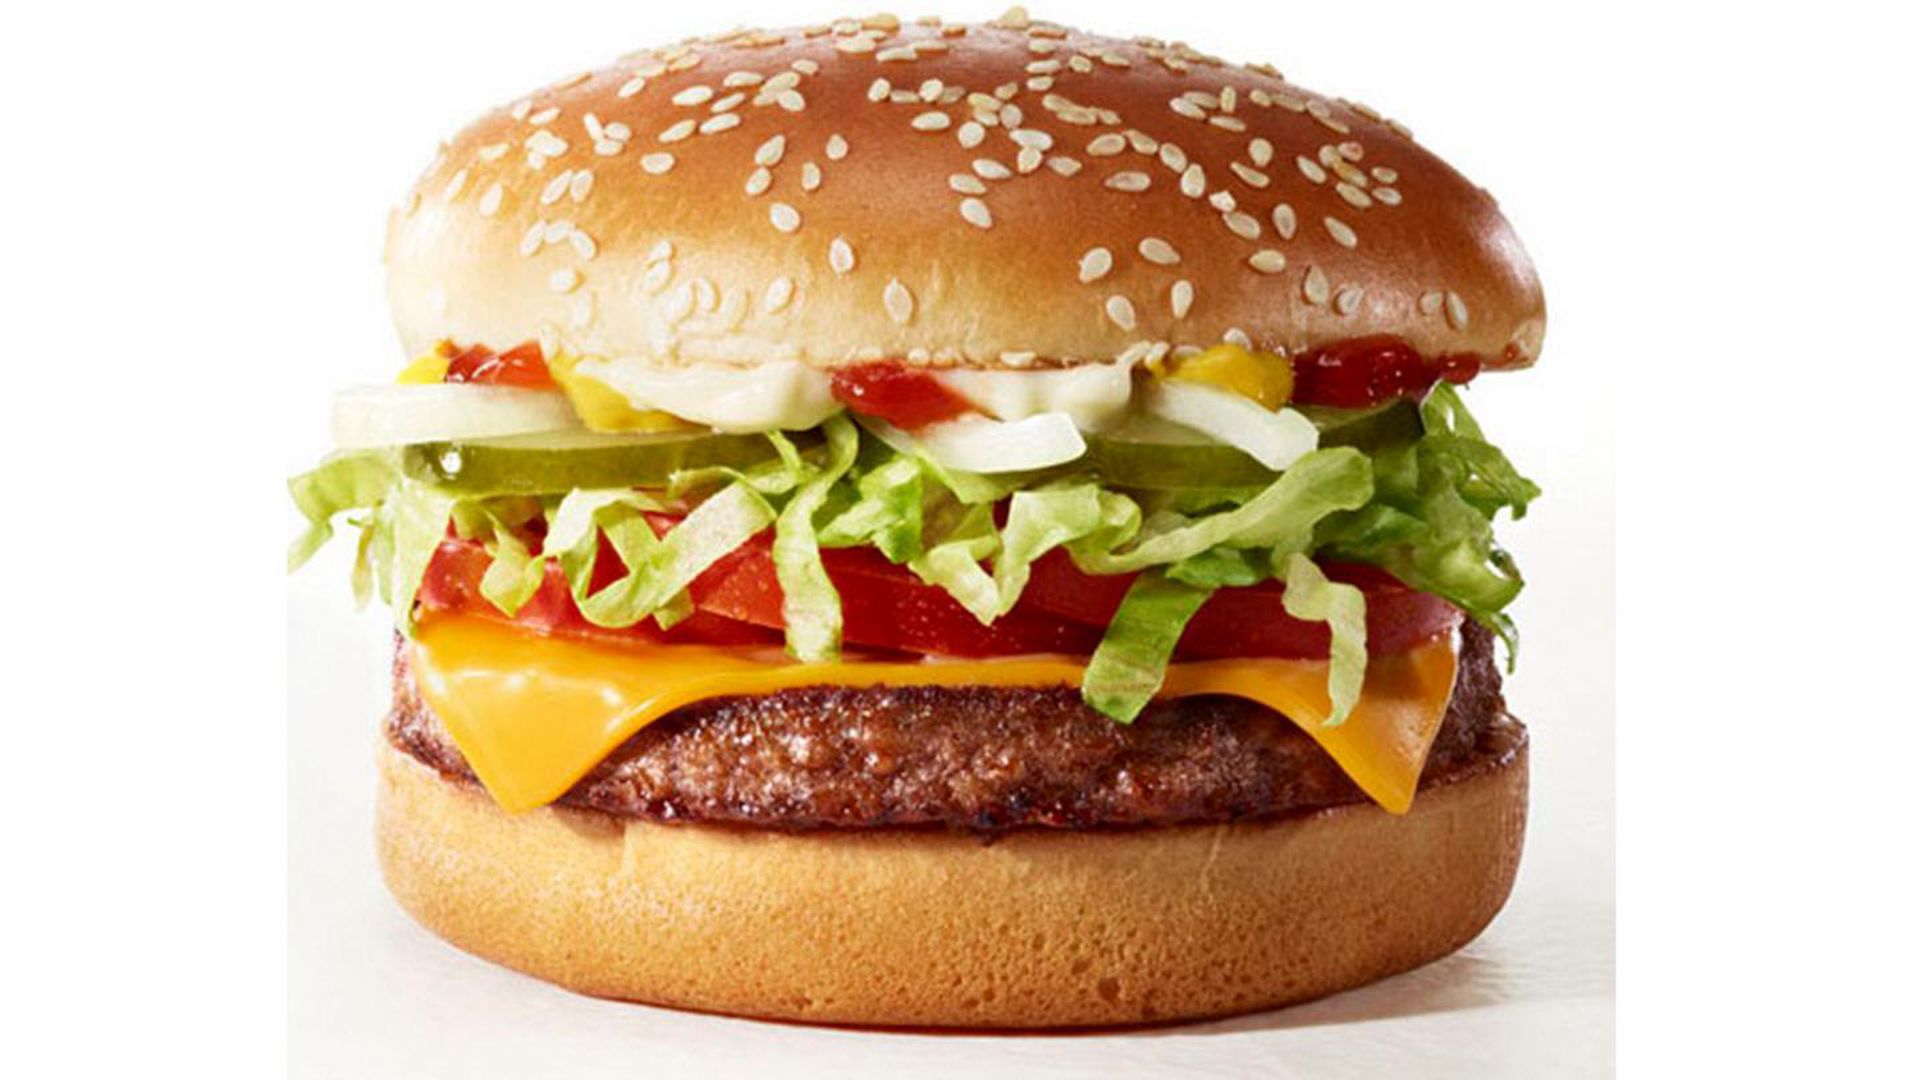 Photo of the McPlant, a hamburger with plant-based patty, cheese, lettuce and tomatoes